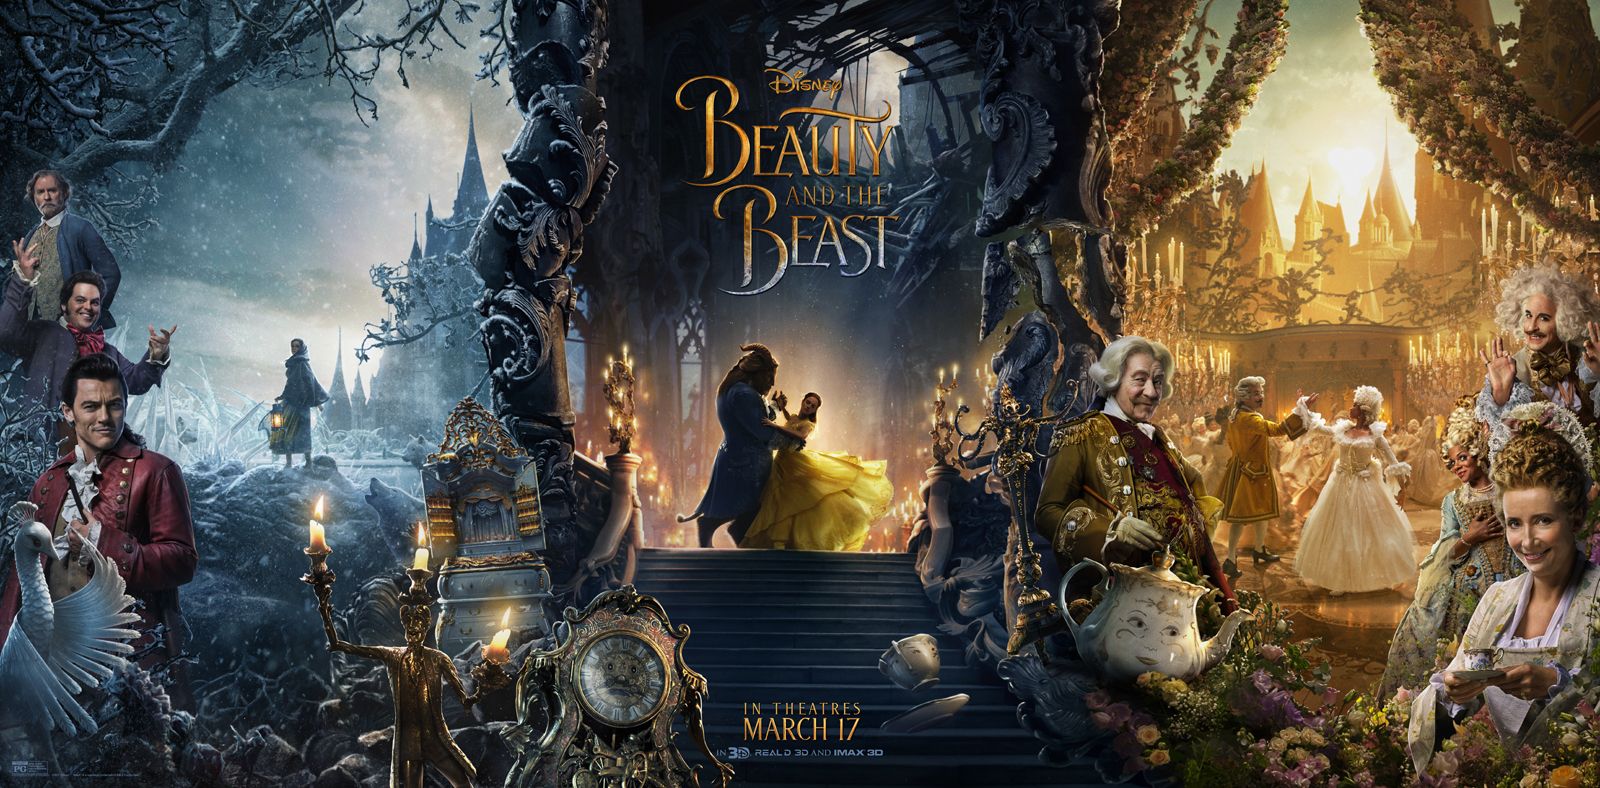 Beauty and the Beast Scannain Review